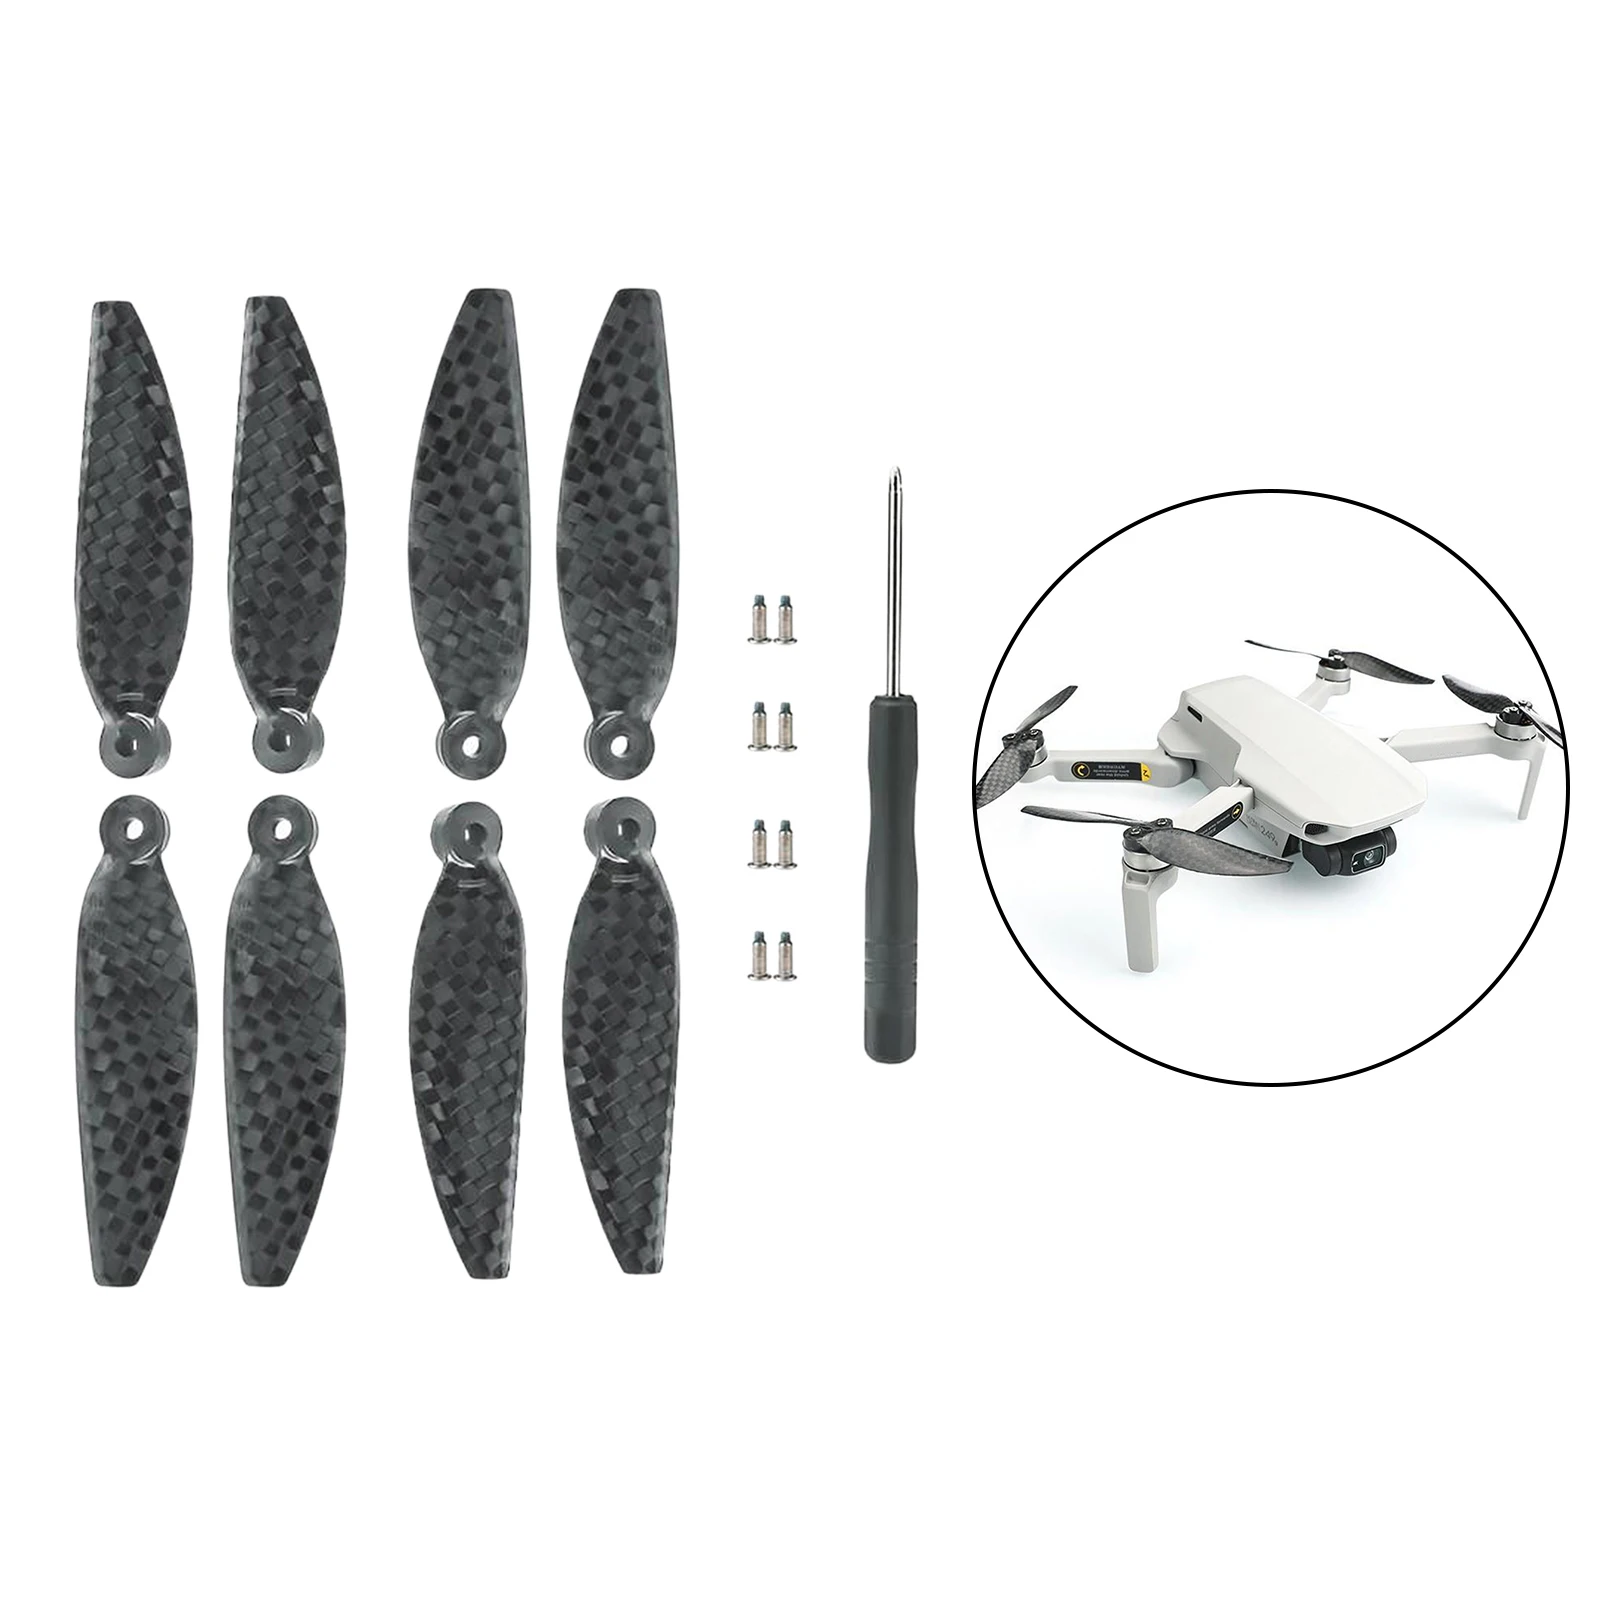 

8pcs Foldable Propellers Blades for DJI Mavic Mini 2 Drone Replacement Accessory Well Balanced Props Black